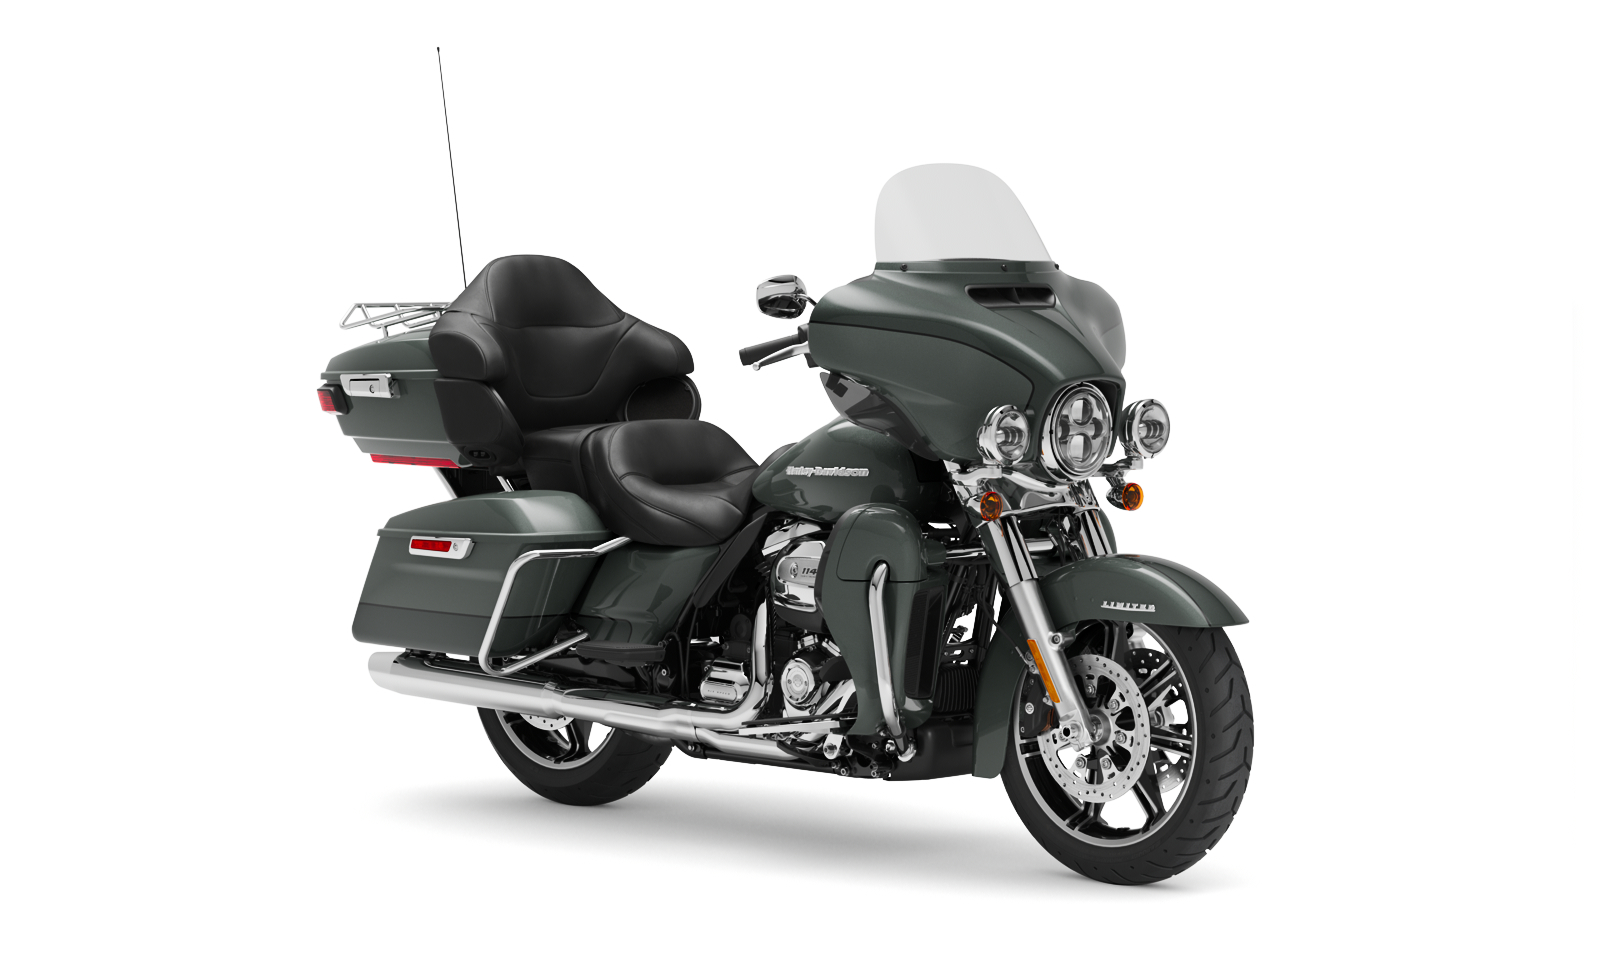 2019 Harley Davidson Ultra Limited Colors Clearance, 55% OFF 